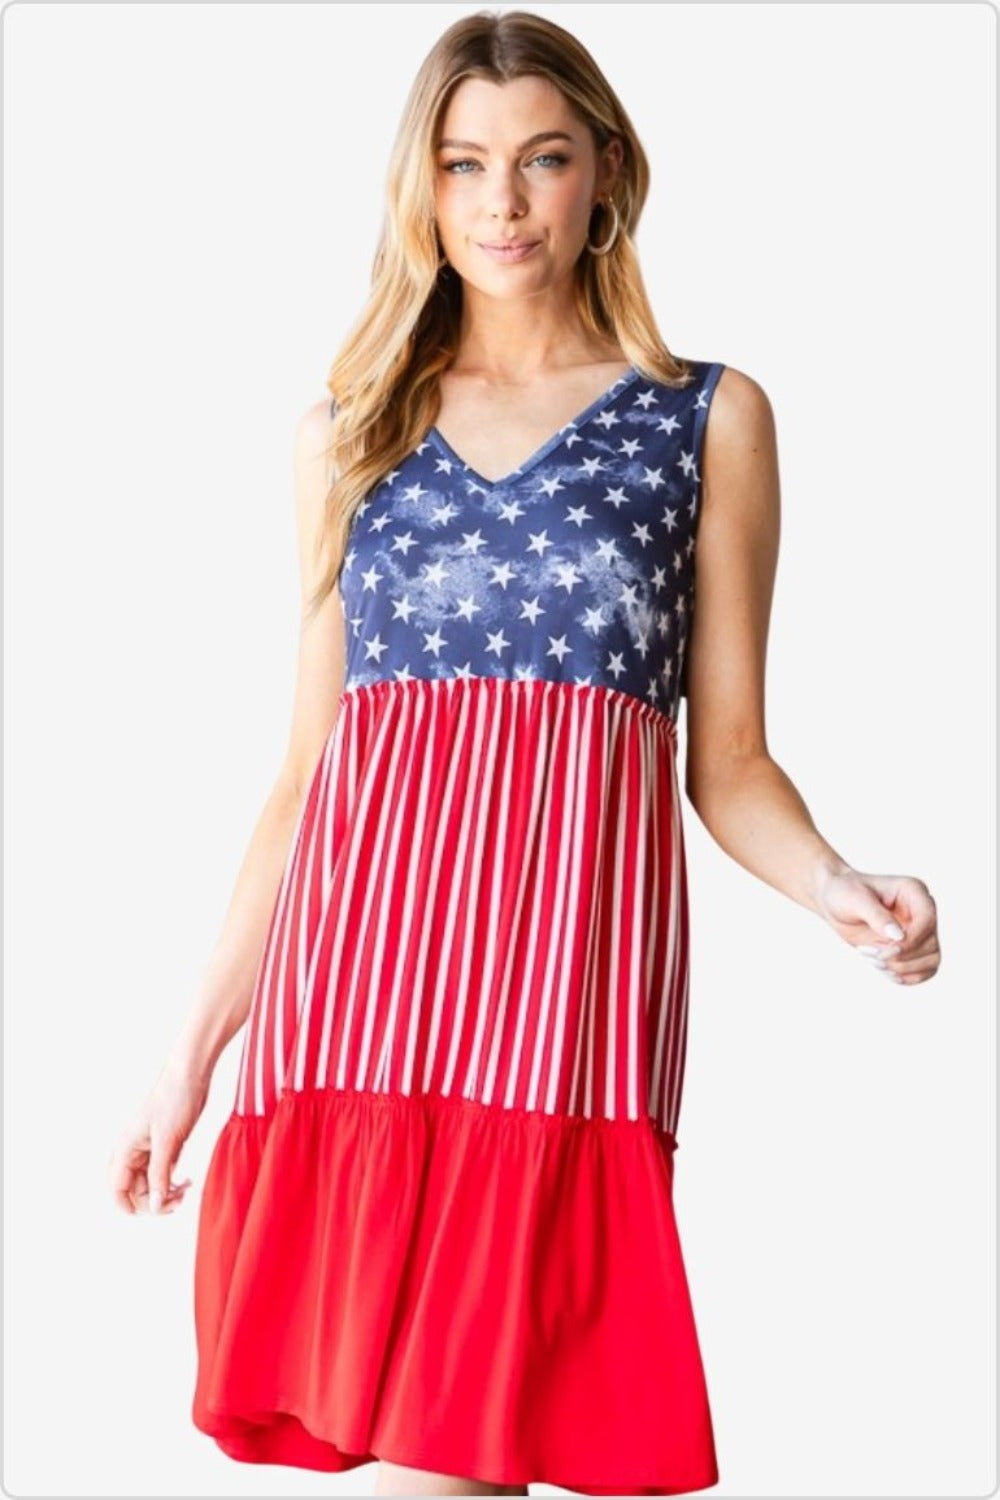 Woman in a sleeveless summer dress with American flag pattern, featuring stars on blue top and stripes on red skirt.